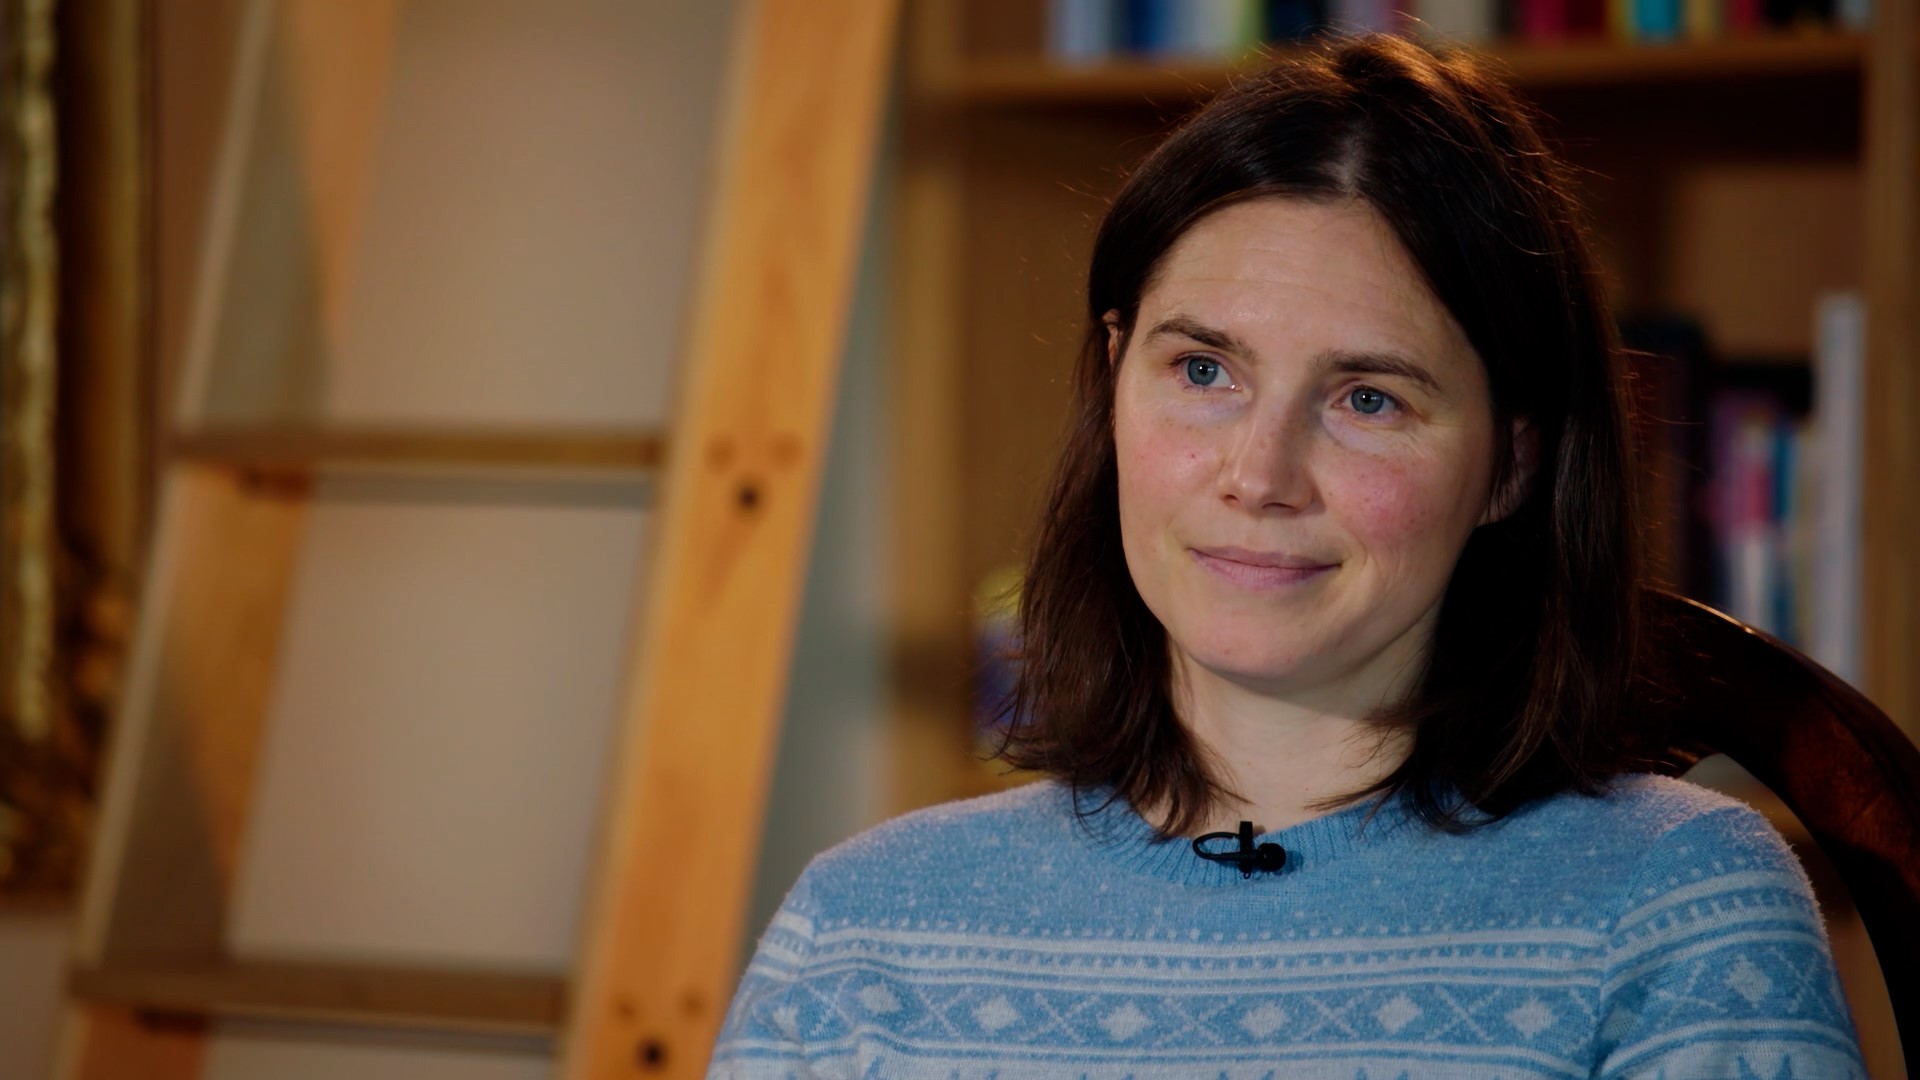 Amanda Knox speaks with Joyce Taylor about the new trial she's facing, why she's doing it and the influence motherhood has on her commitment to help others.